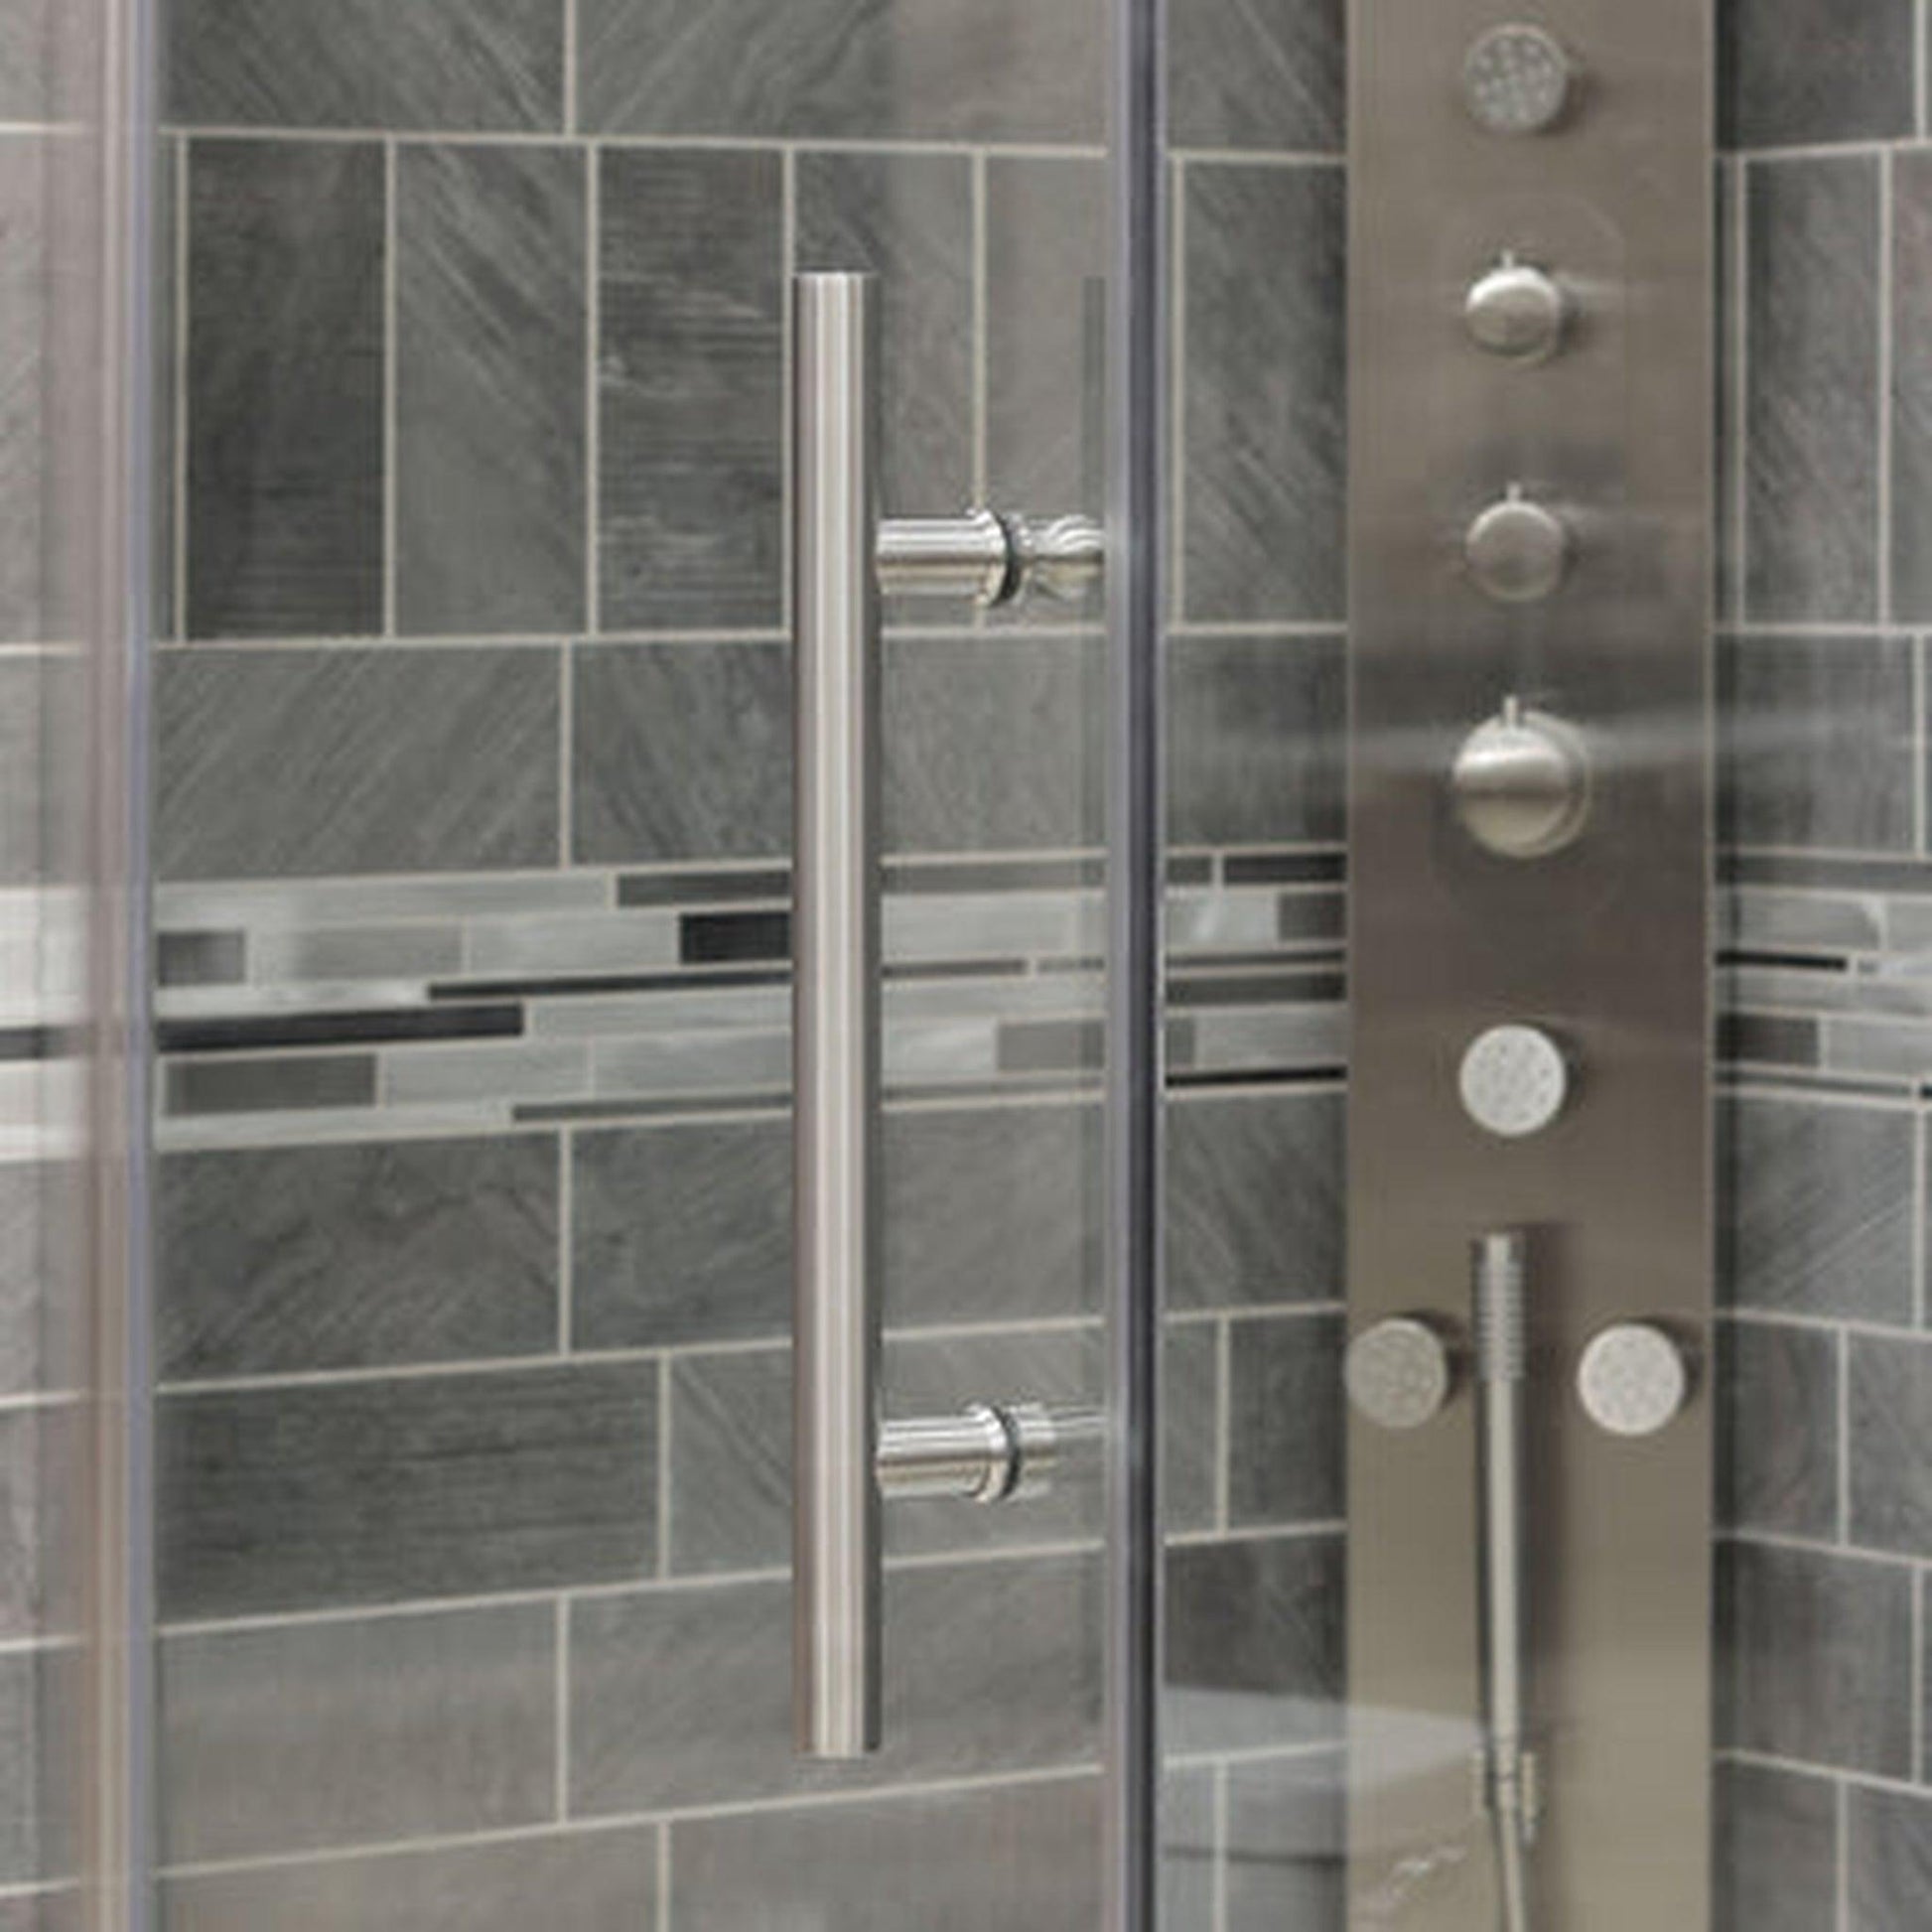 LessCare Ultra-G 29-30" x 72" Brushed Nickel Swing-Out Shower Door